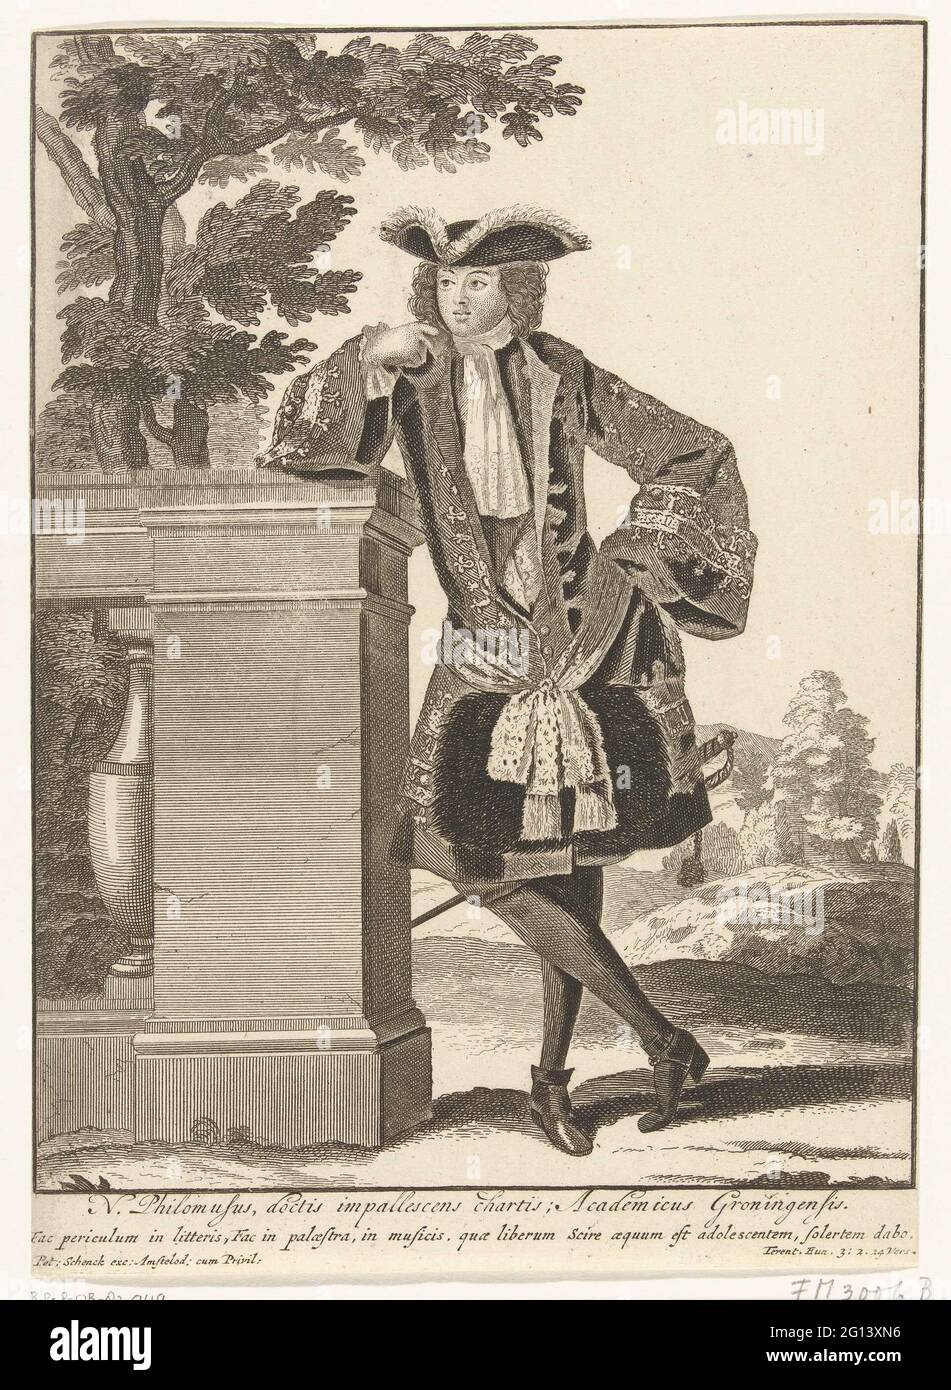 Groninger student, ca. 1700; N. Philomusus, Doctis Impallescens Charitis, Academician Groningenis. Student from the University of Groningen, standing for feet, leaned against a balustrade. He is dressed according to the French fashion of his time. Stock Photo